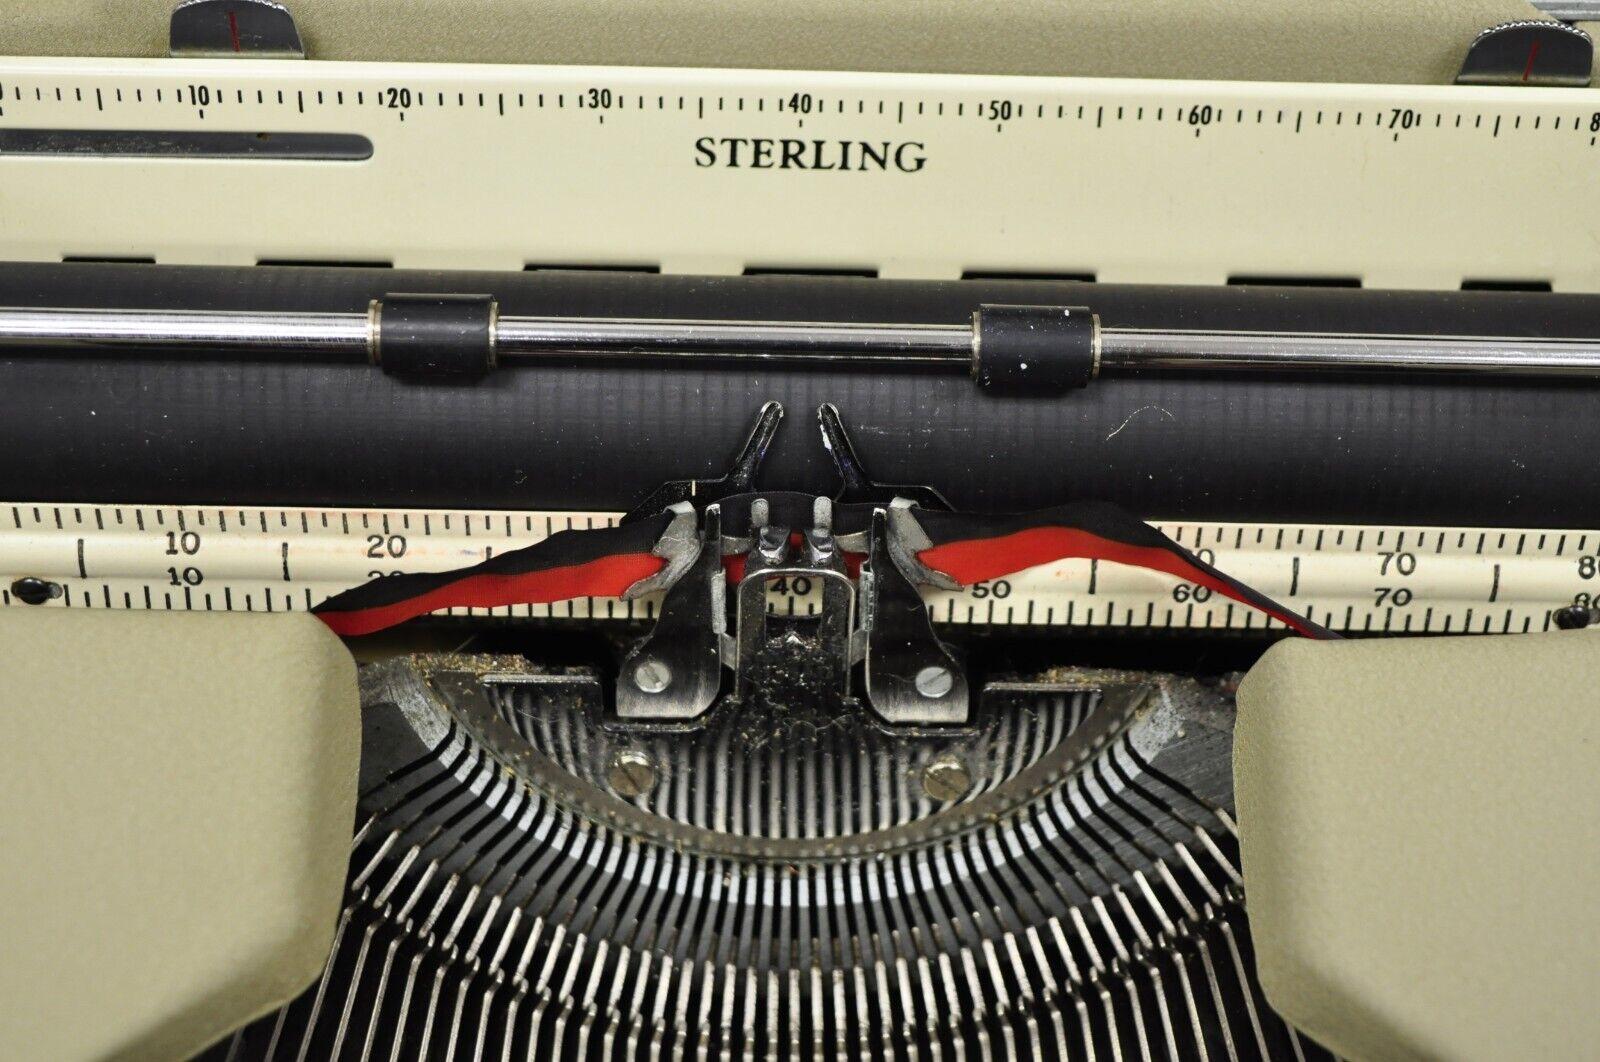 Mid-Century Modern Vintage Smith Corona Sterling Manual Portable Typewriter with Hard Case For Sale